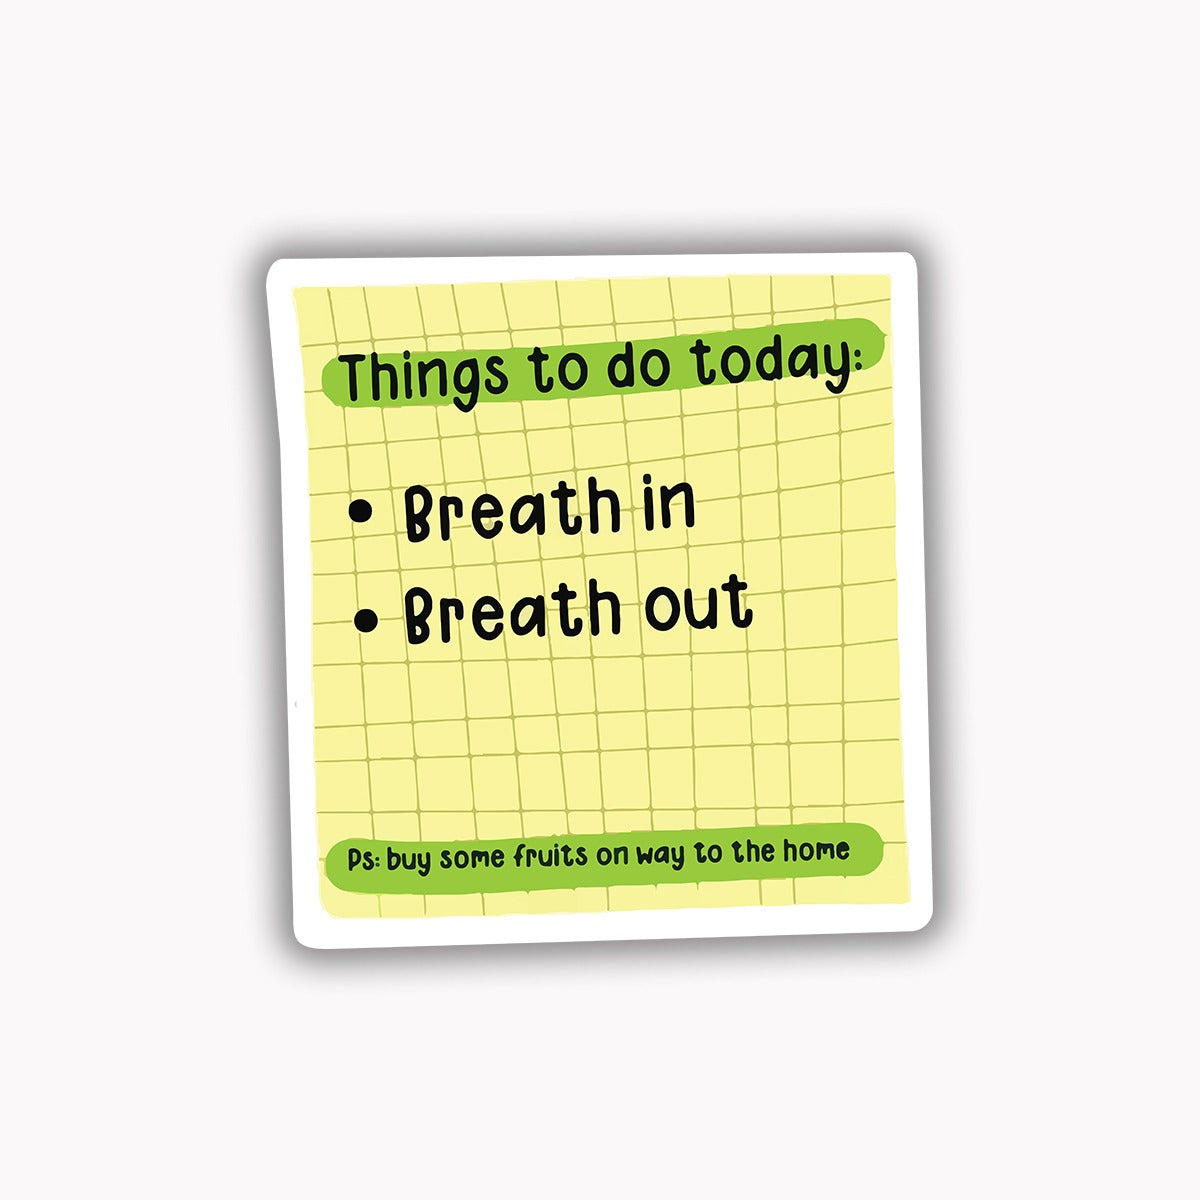 Things to do today breath in breath out